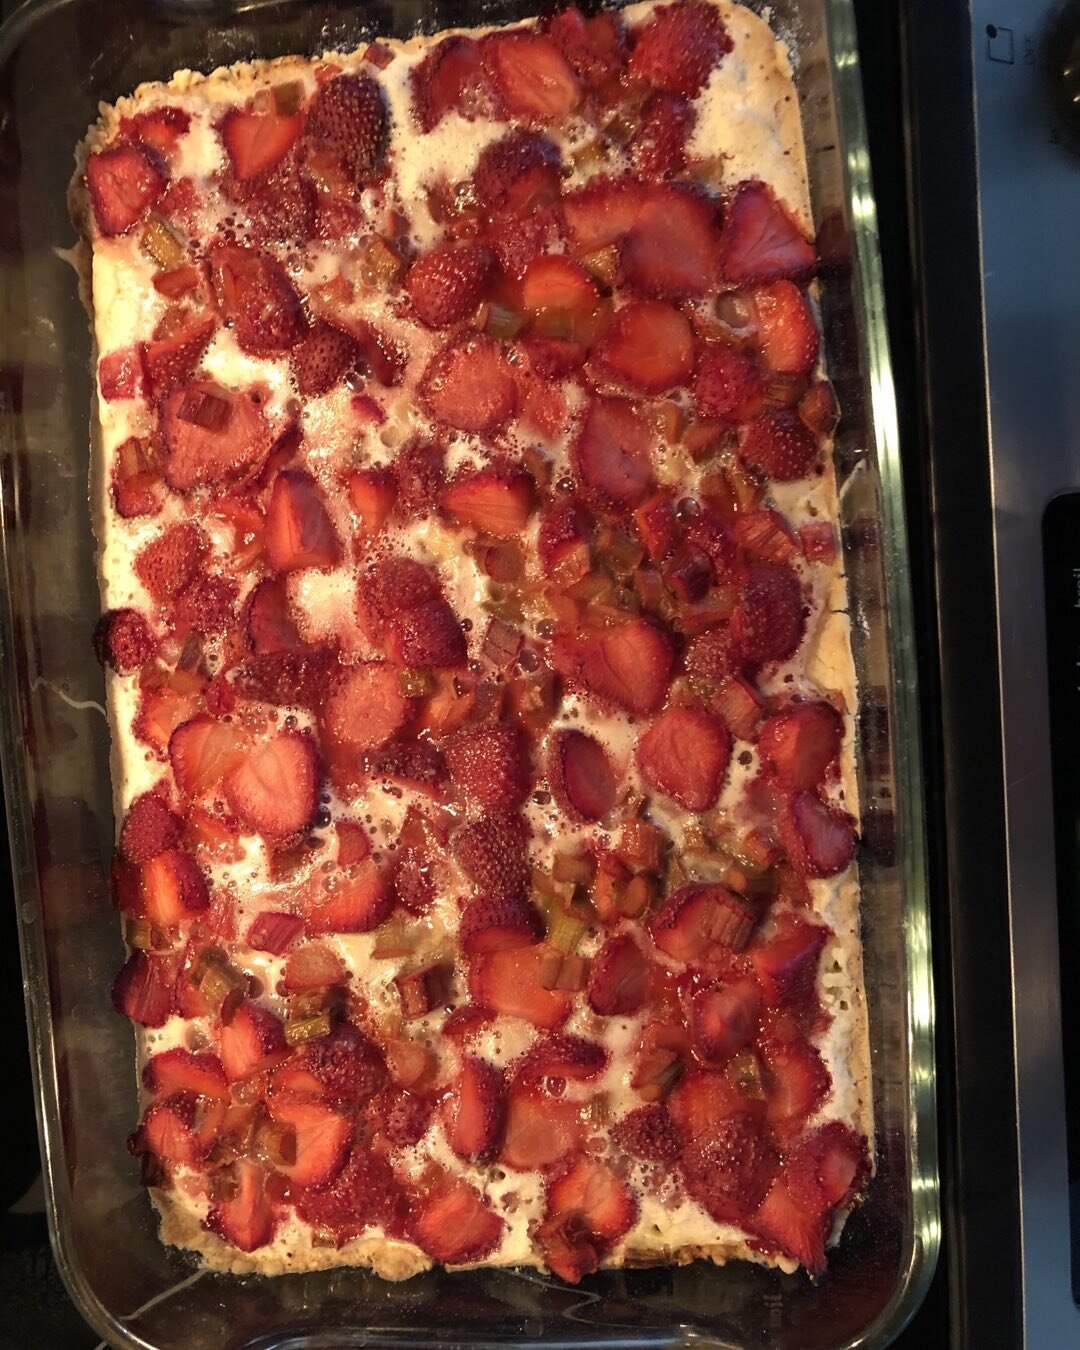 Last of my Ontario strawberries! Strawberry Rhubarb squares! Now off to work!